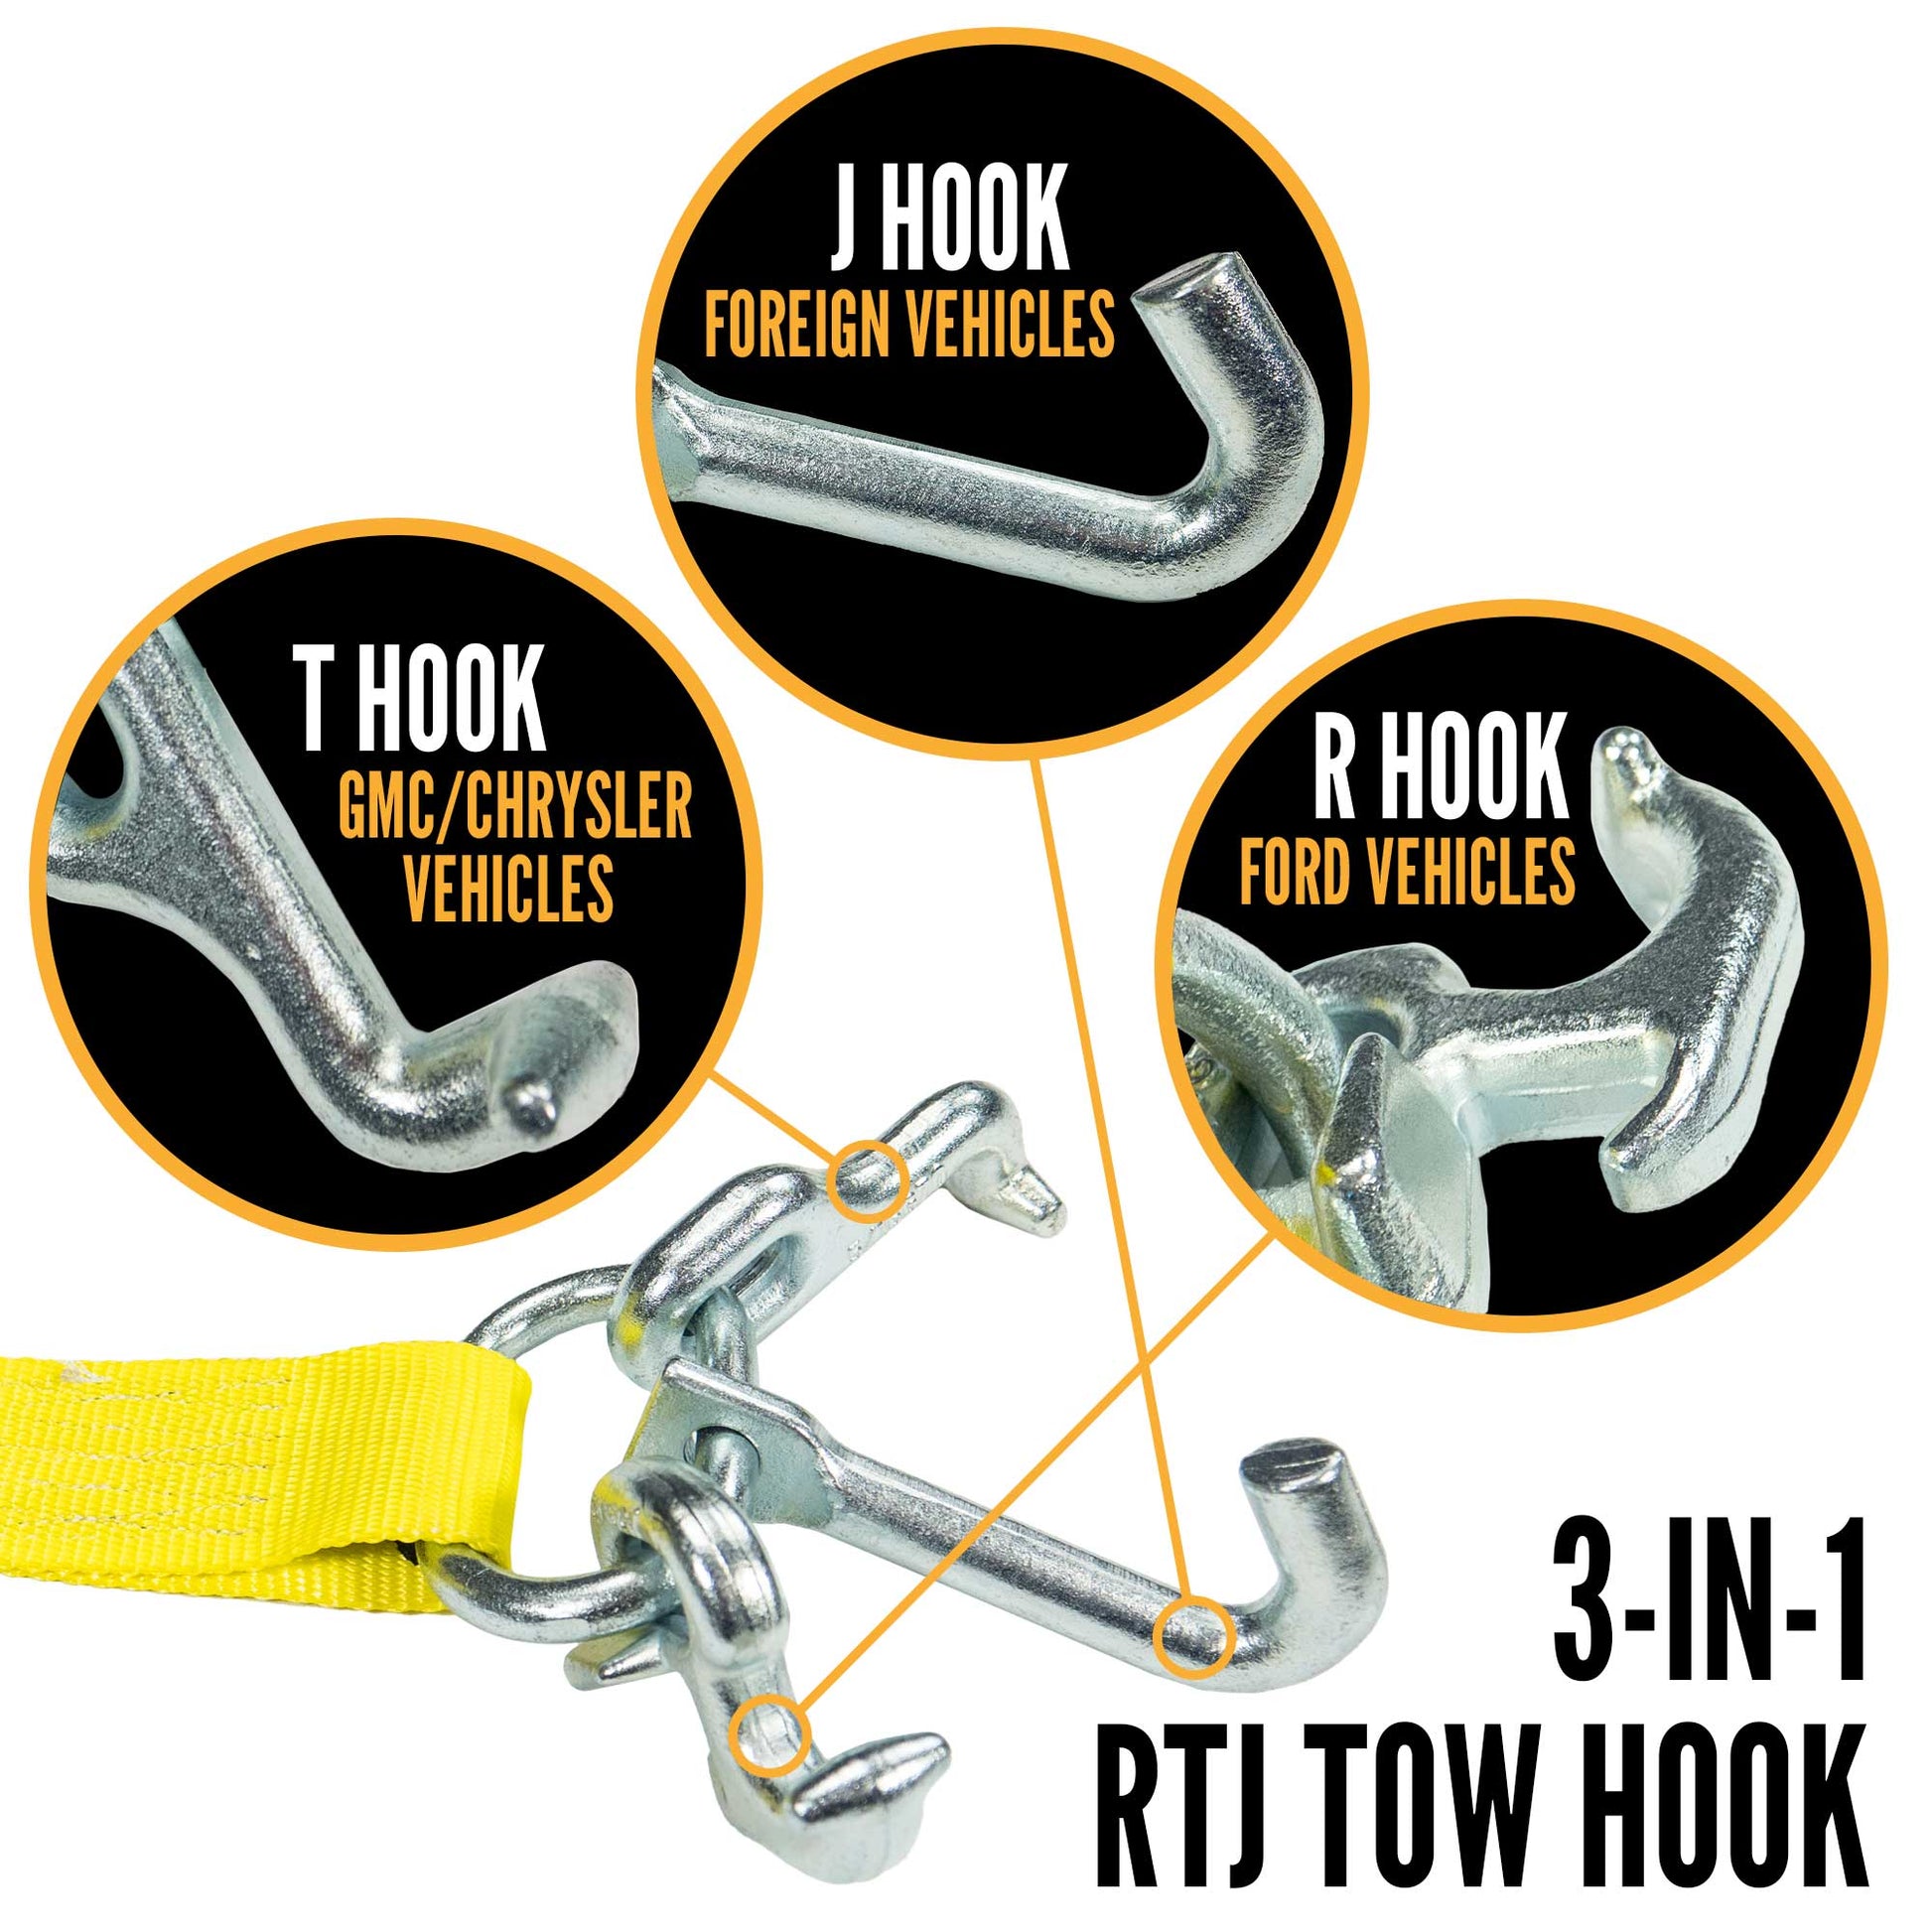 15' tow truck strap -  RTJ cluster hook attaches to 3 kinds of vehicles